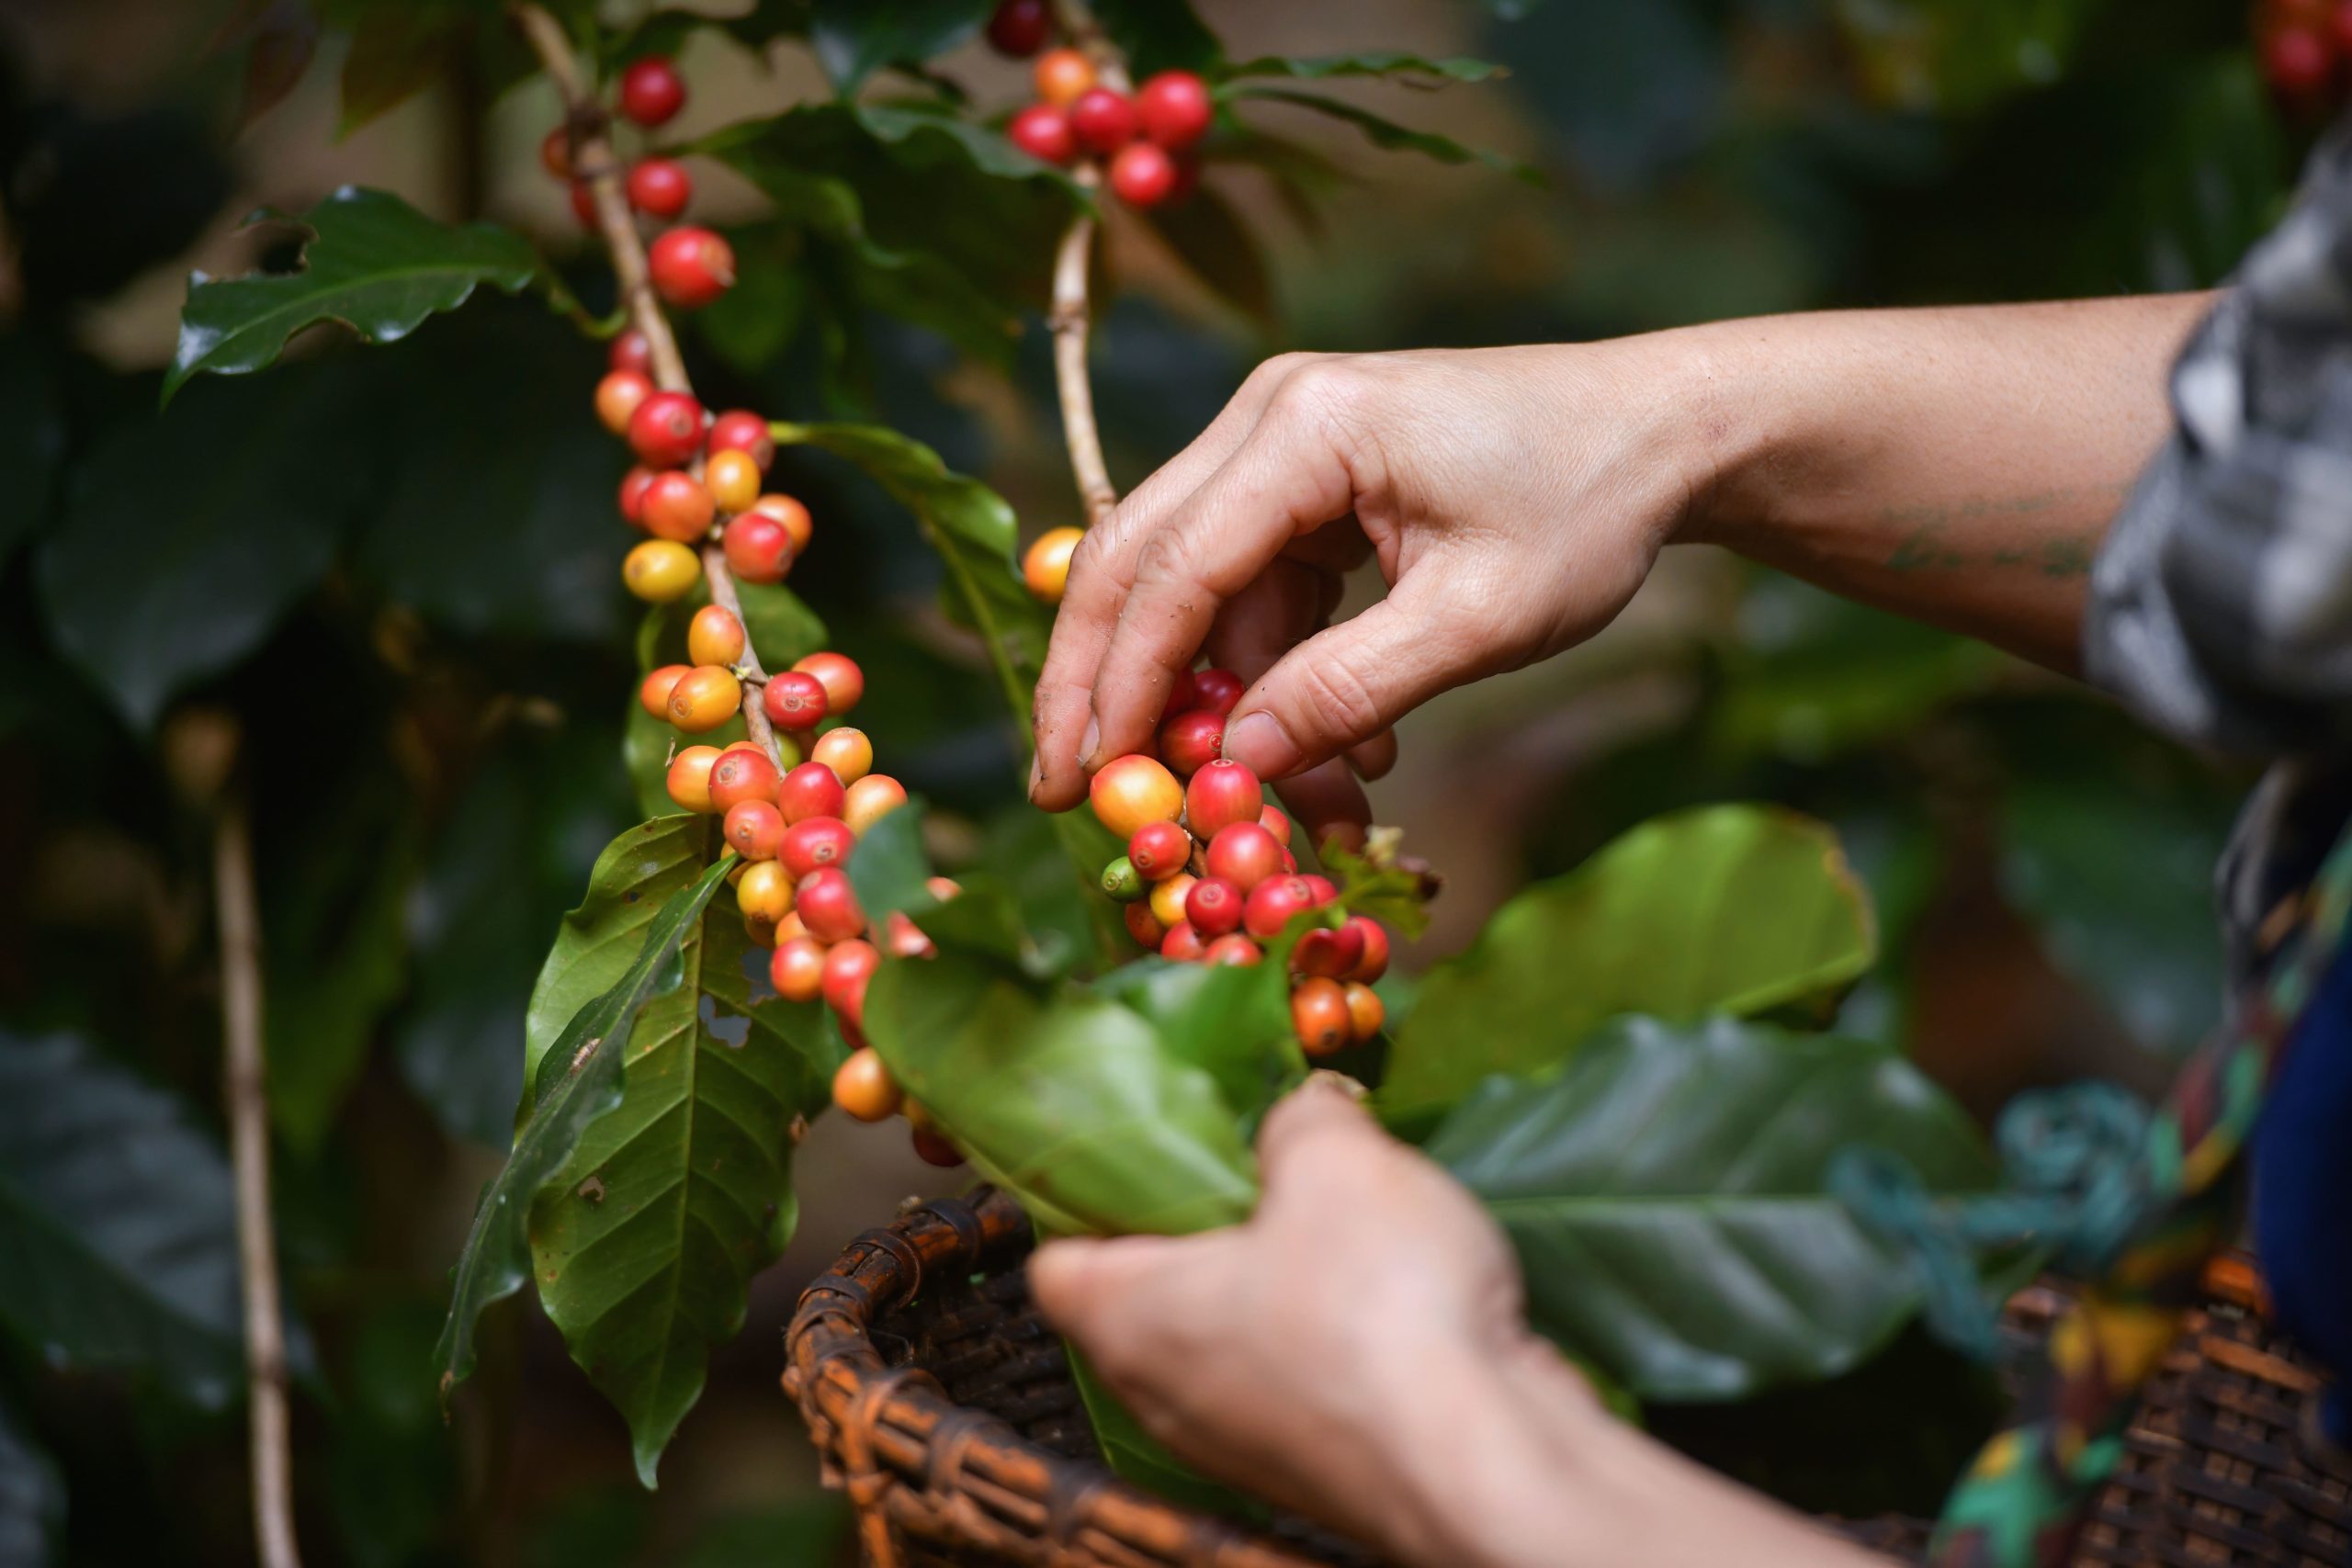 A worker picks coffee cherries from a coffee tree.